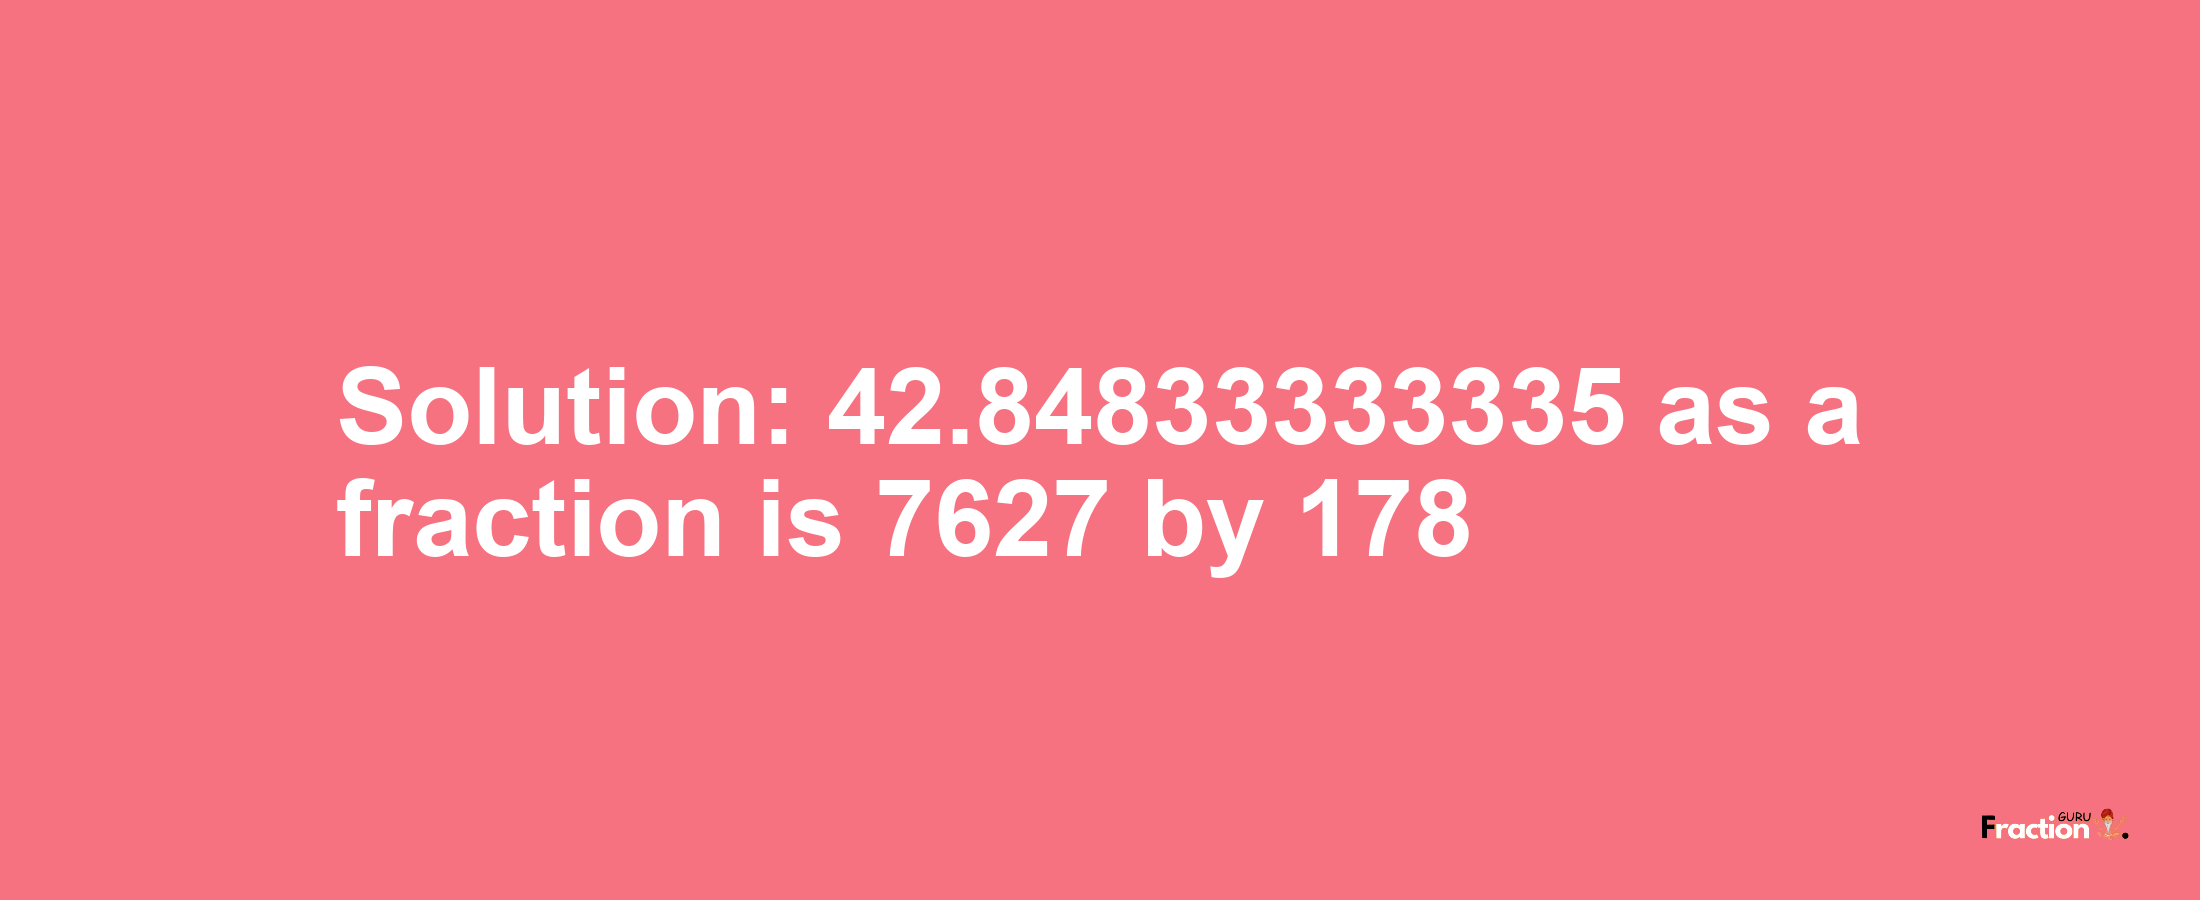 Solution:42.84833333335 as a fraction is 7627/178